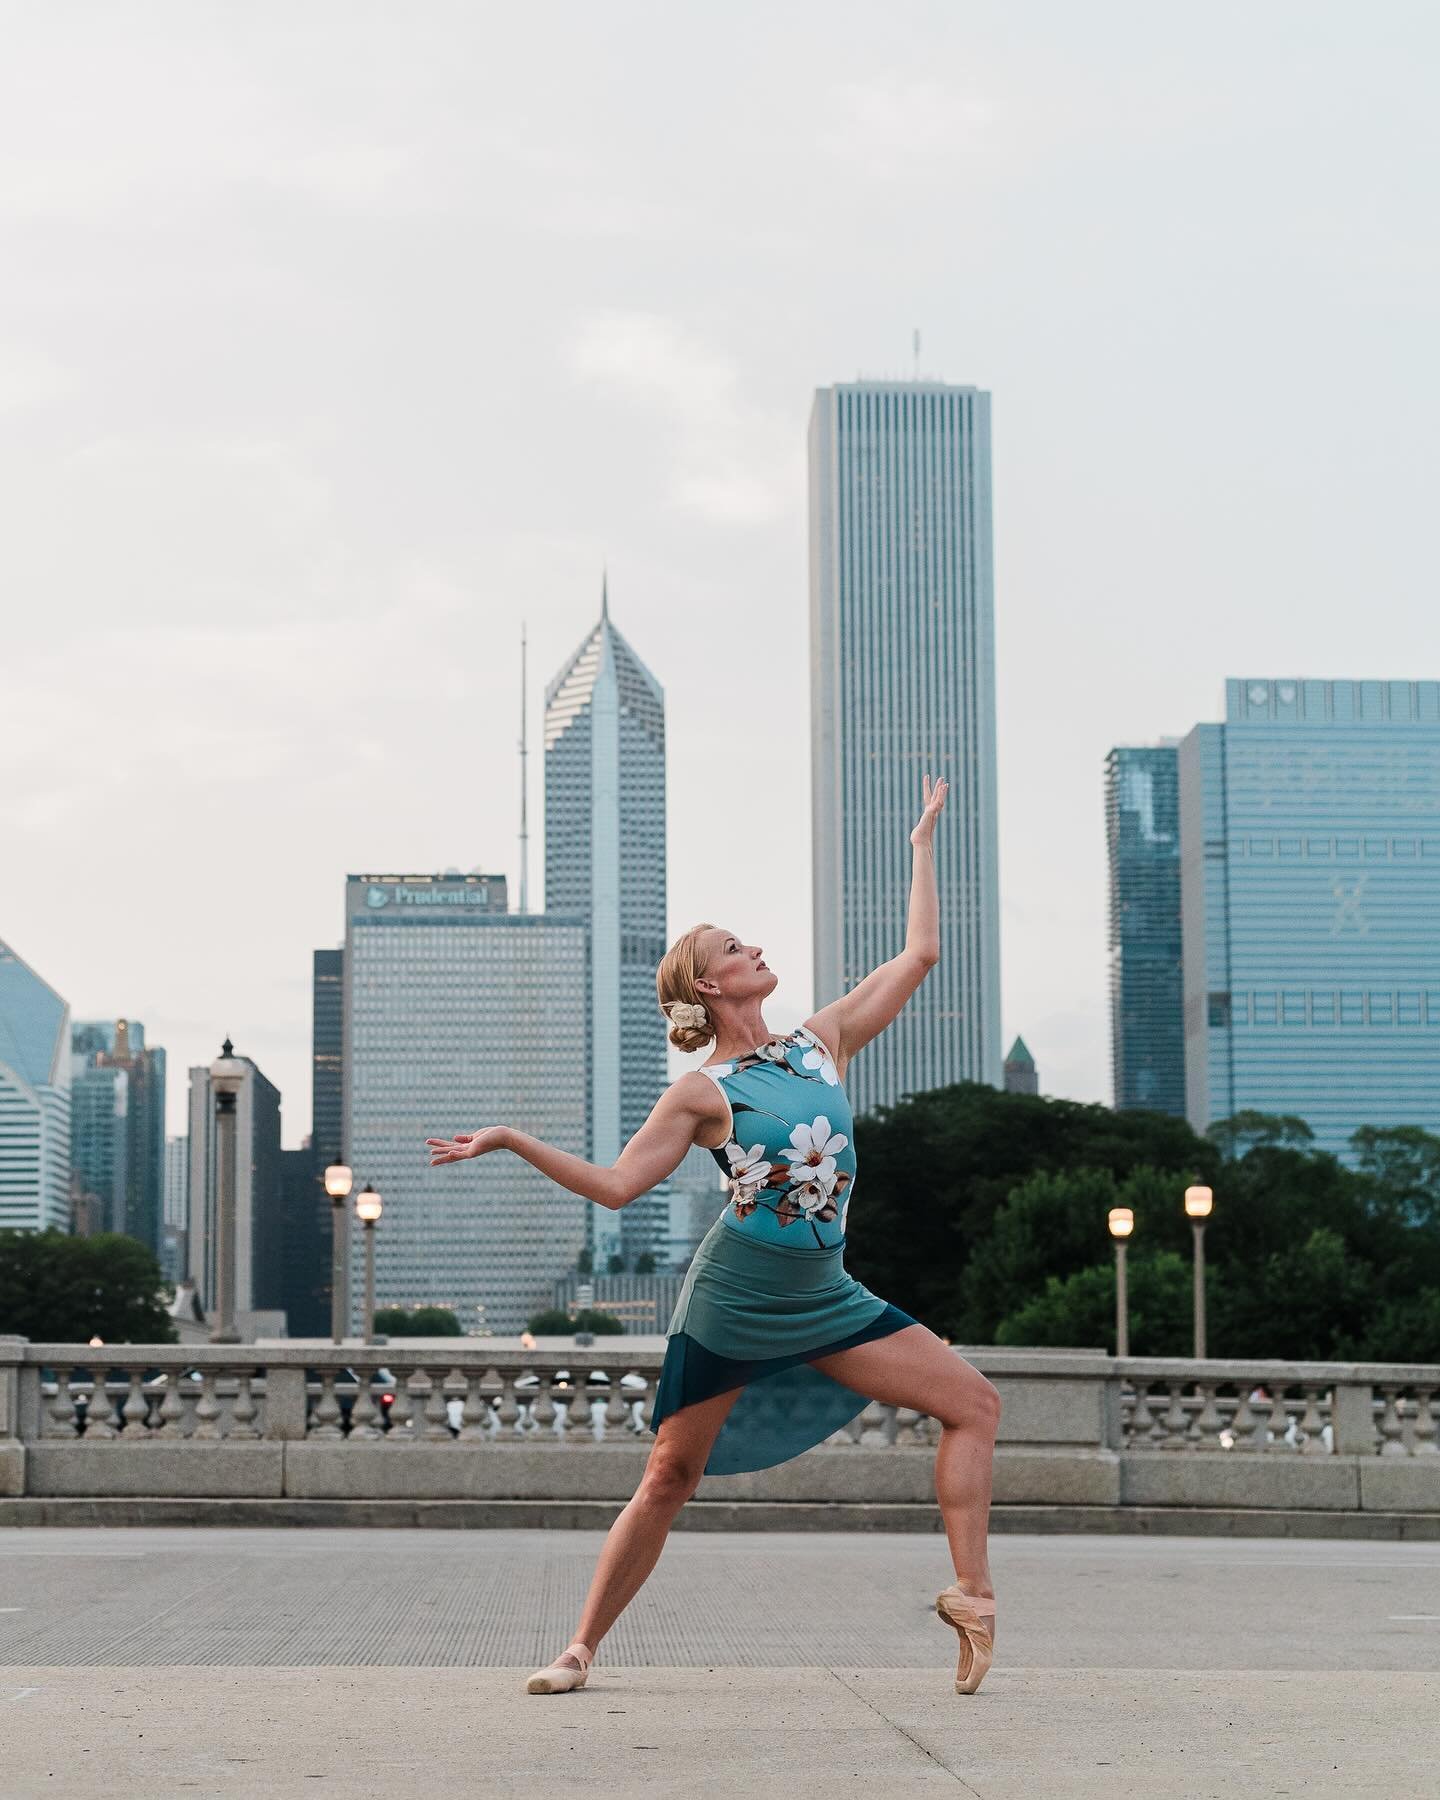 Hey Chicago, wanna work together?!

I&rsquo;ve got 2 slots available May 28-30th!

No travel fees. On location or in a studio. 

Send me a DM if you&rsquo;d like to claim your spot and discuss your vision!✨

#chicagodancers #chicagodancecommunity #se